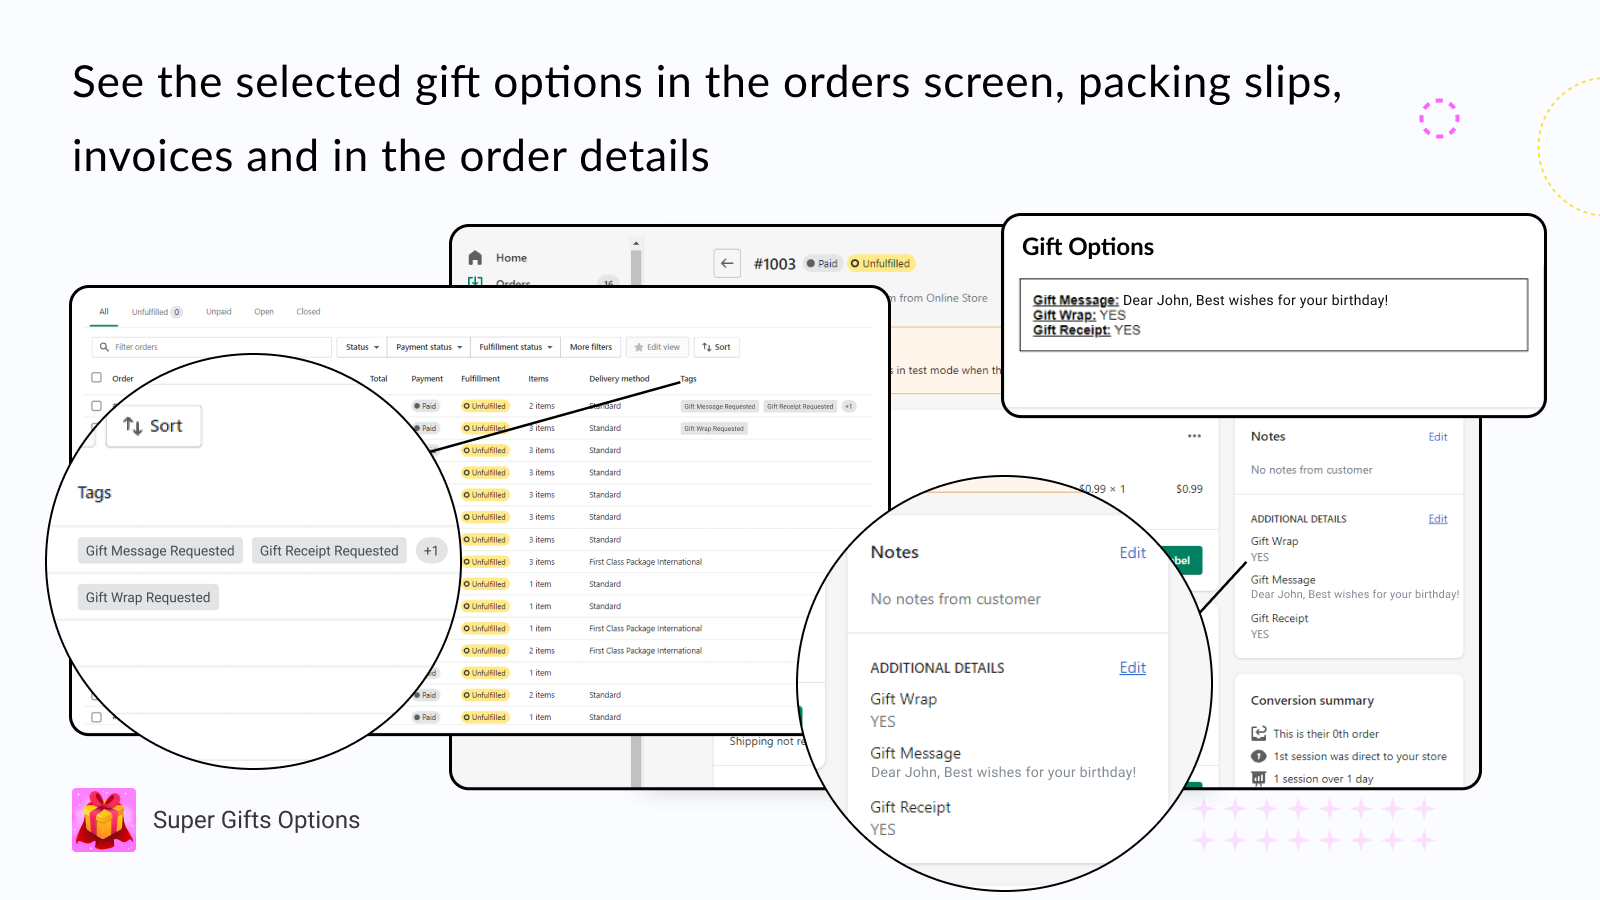 The gift options can be added to the packing slip and invoices